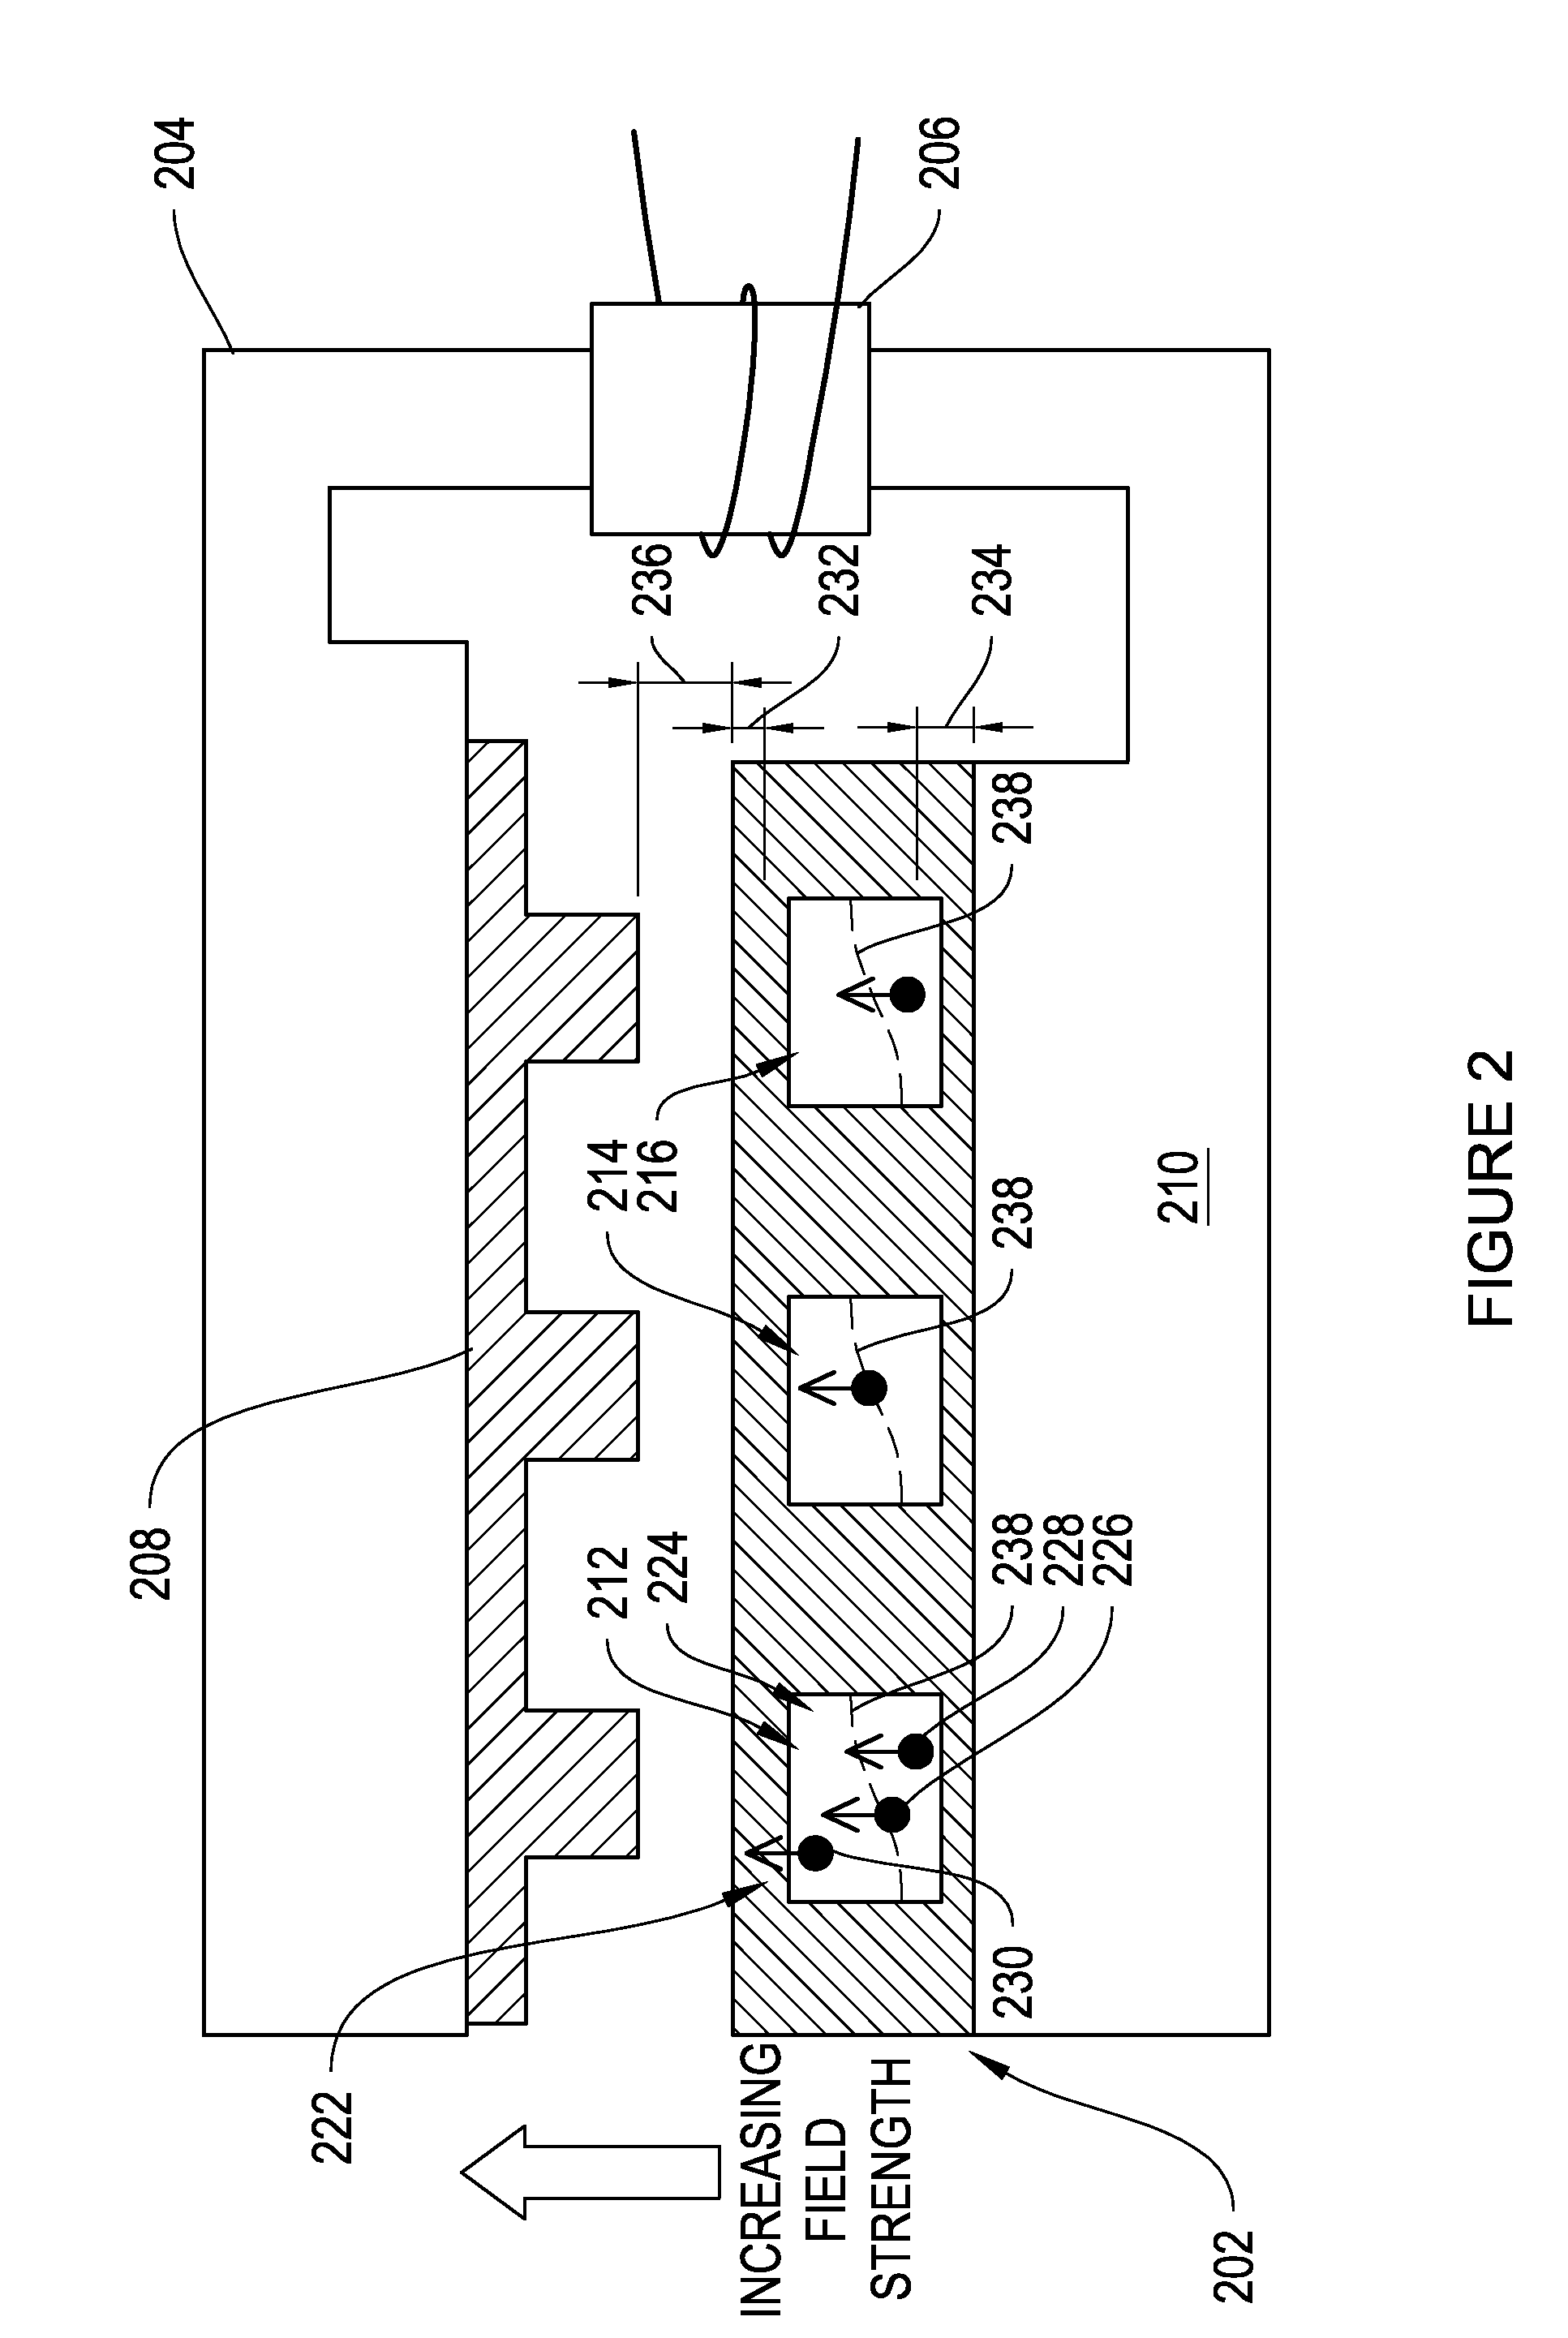 Method and apparatus for separating particles, cells, molecules and particulates